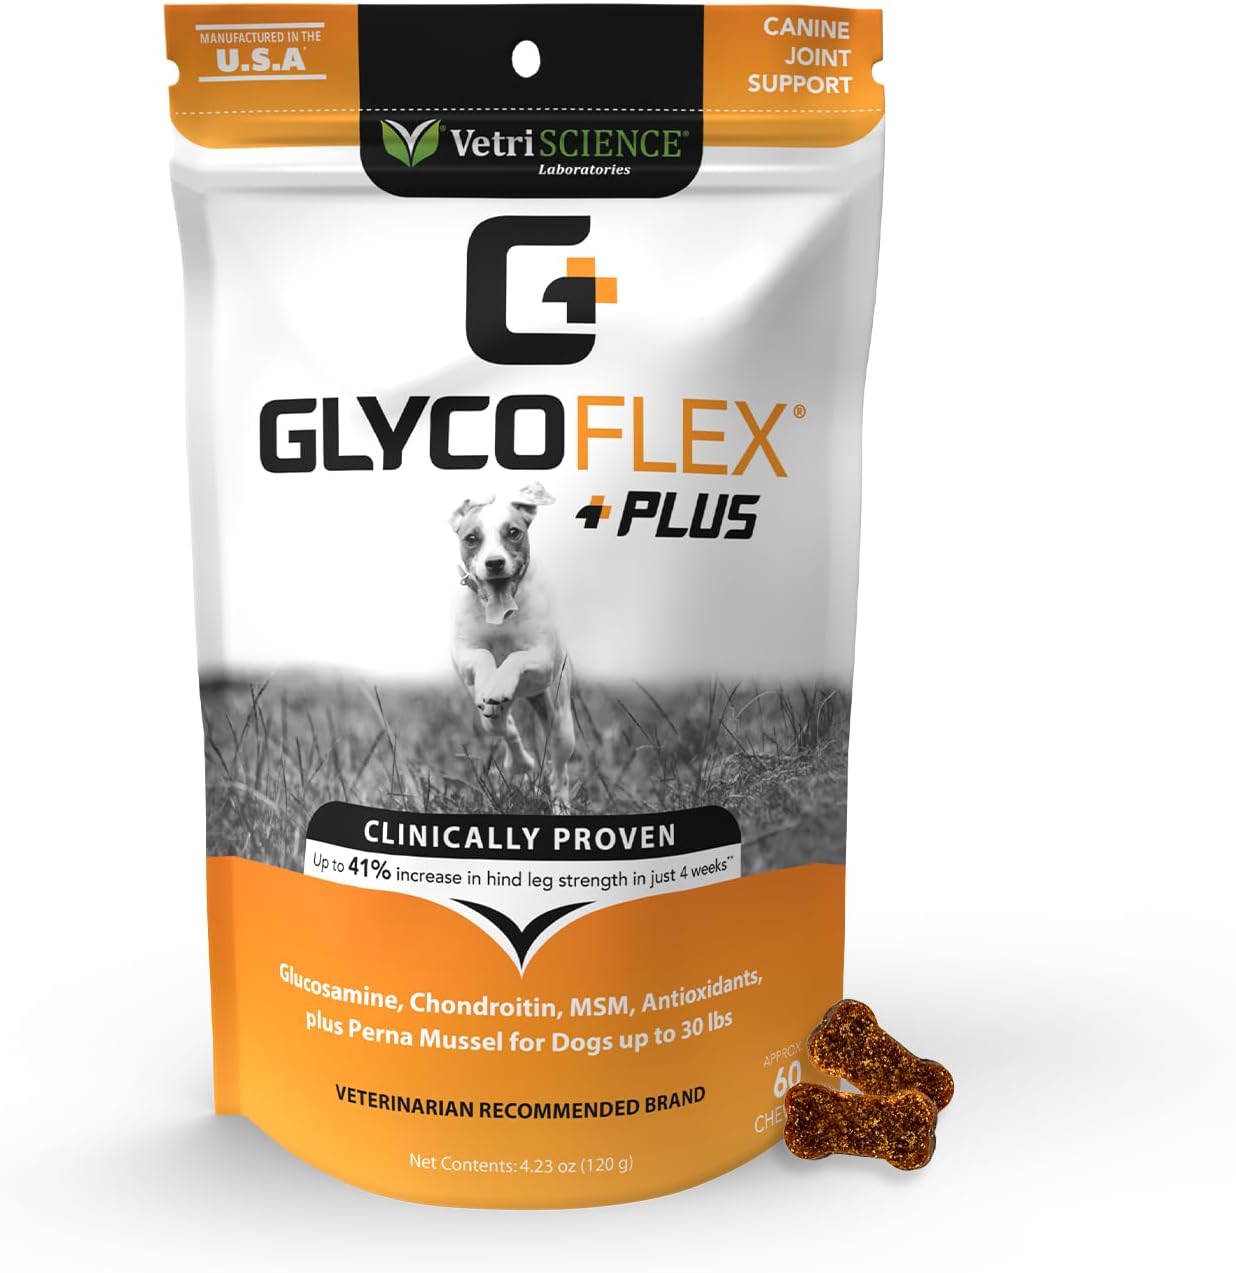 VetriScience GlycoFlex Plus Joint Support Dog Supplements - 60 Chews - Extra Strength Hip and Joint Health Supplement with Glucosamine, Chondroitin, MSM & DMG for Small Dogs Under 30 lbs